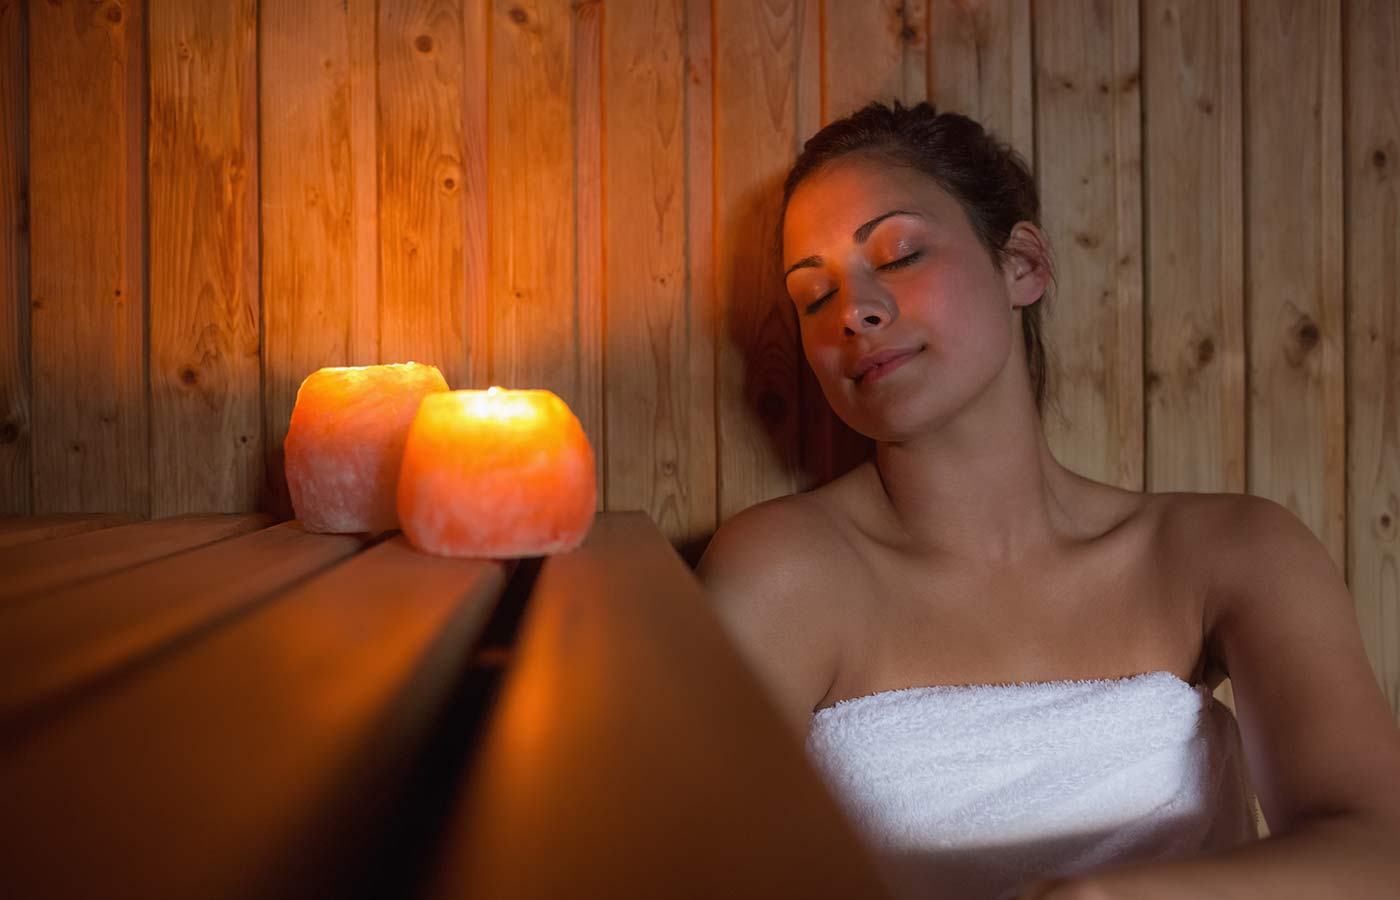 Girl relaxing in a sauna with her eyes closed by candlelight